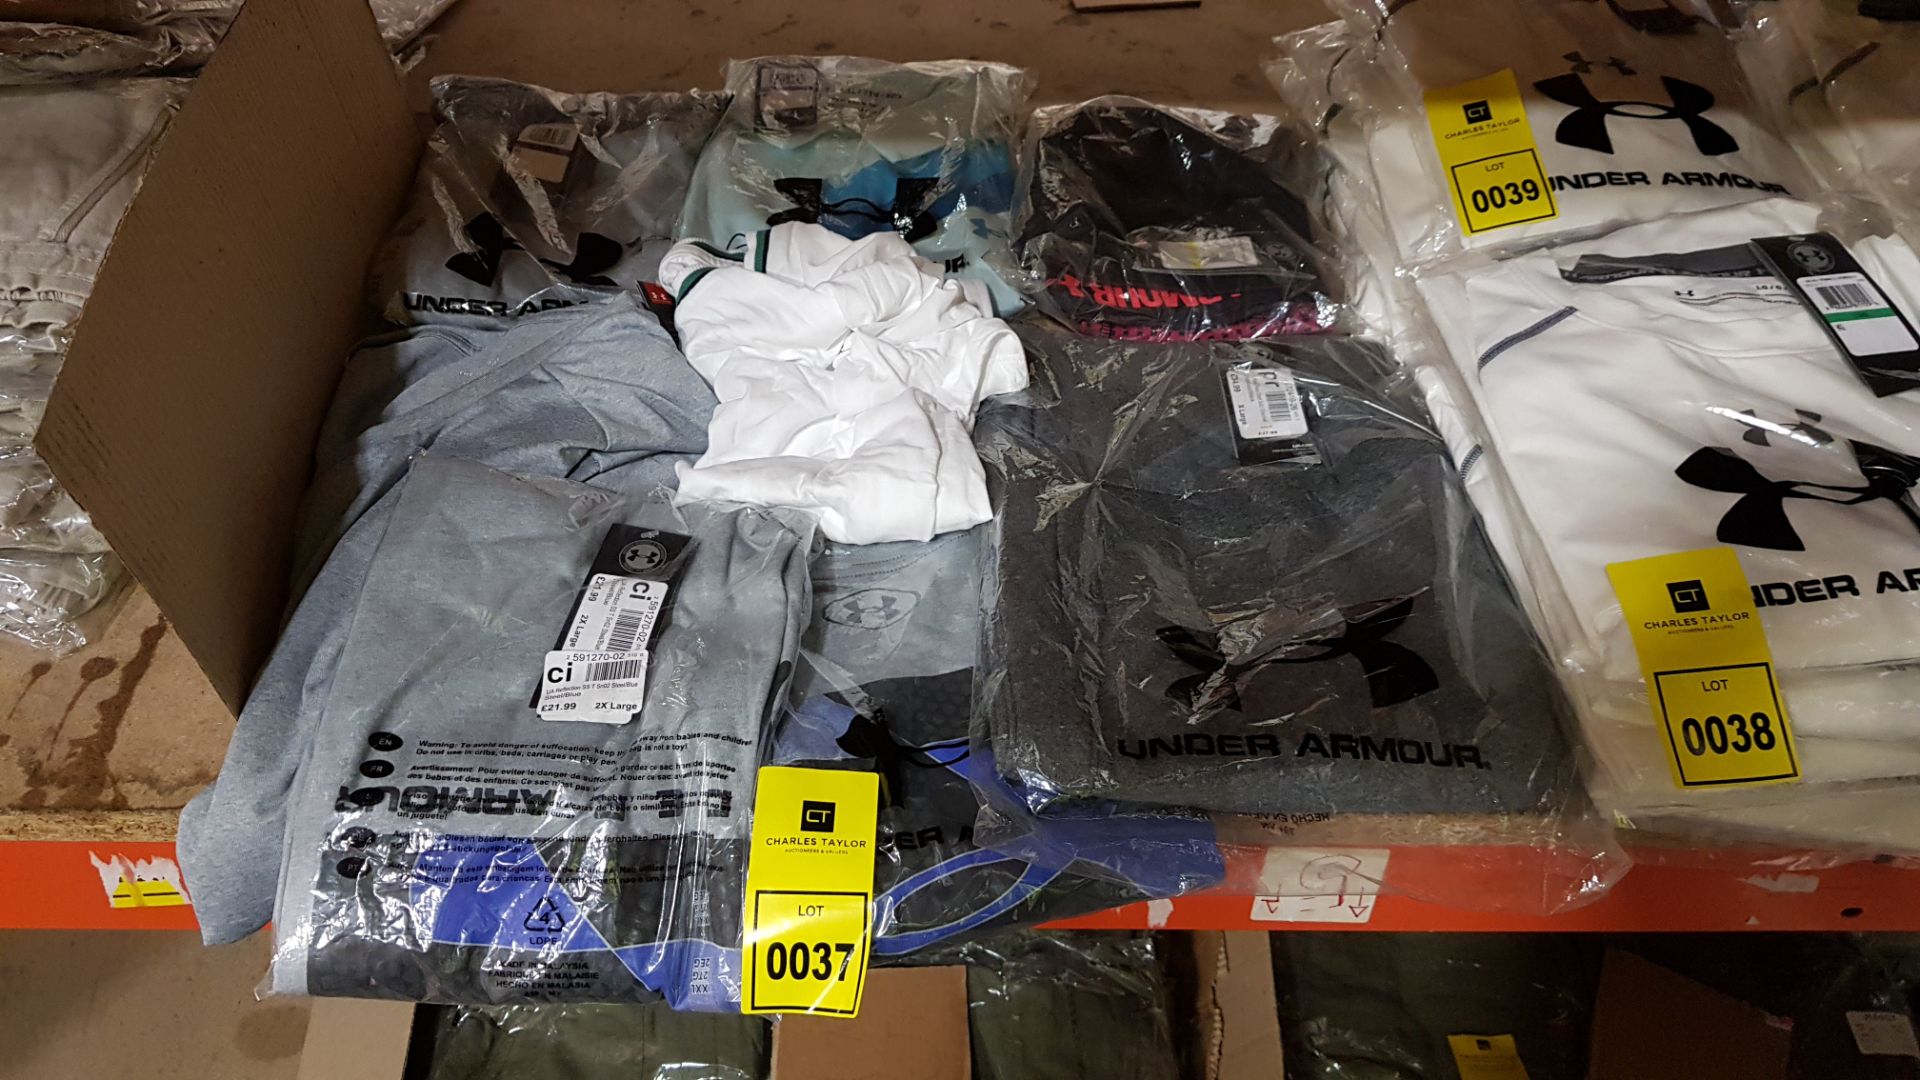 8 X BRAND NEW CLOTHING LOT CONTAINING 1 X JACK & JONES T-SHIFT AND 7 X UNDER ARMOUR SHIRTS AND